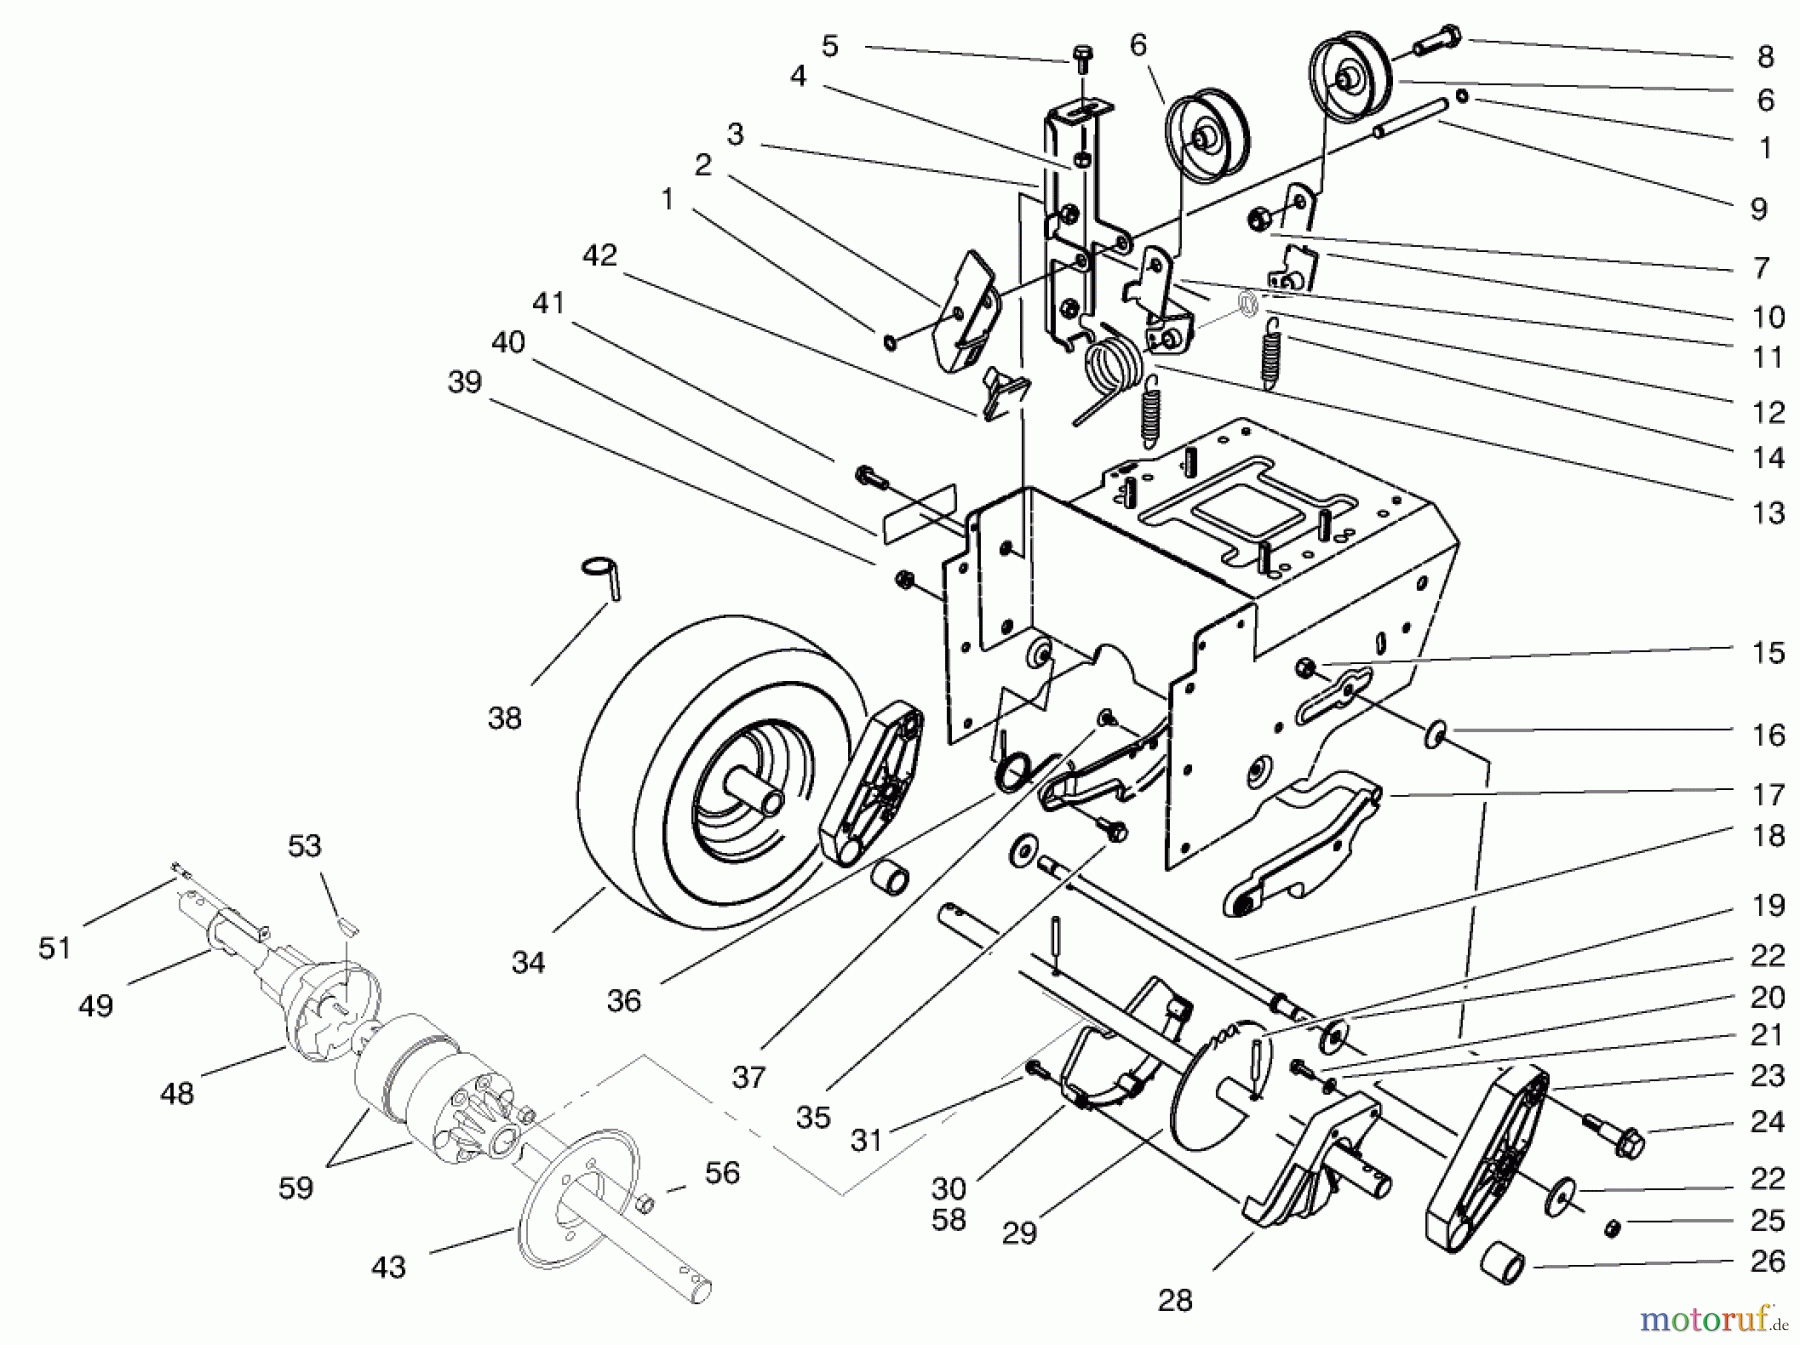  Toro Neu Snow Blowers/Snow Throwers Seite 1 38590 (1232) - Toro 1232 Power Shift Snowthrower, 1997 (7900001-7999999) TRACTION DRIVE ASSEMBLY